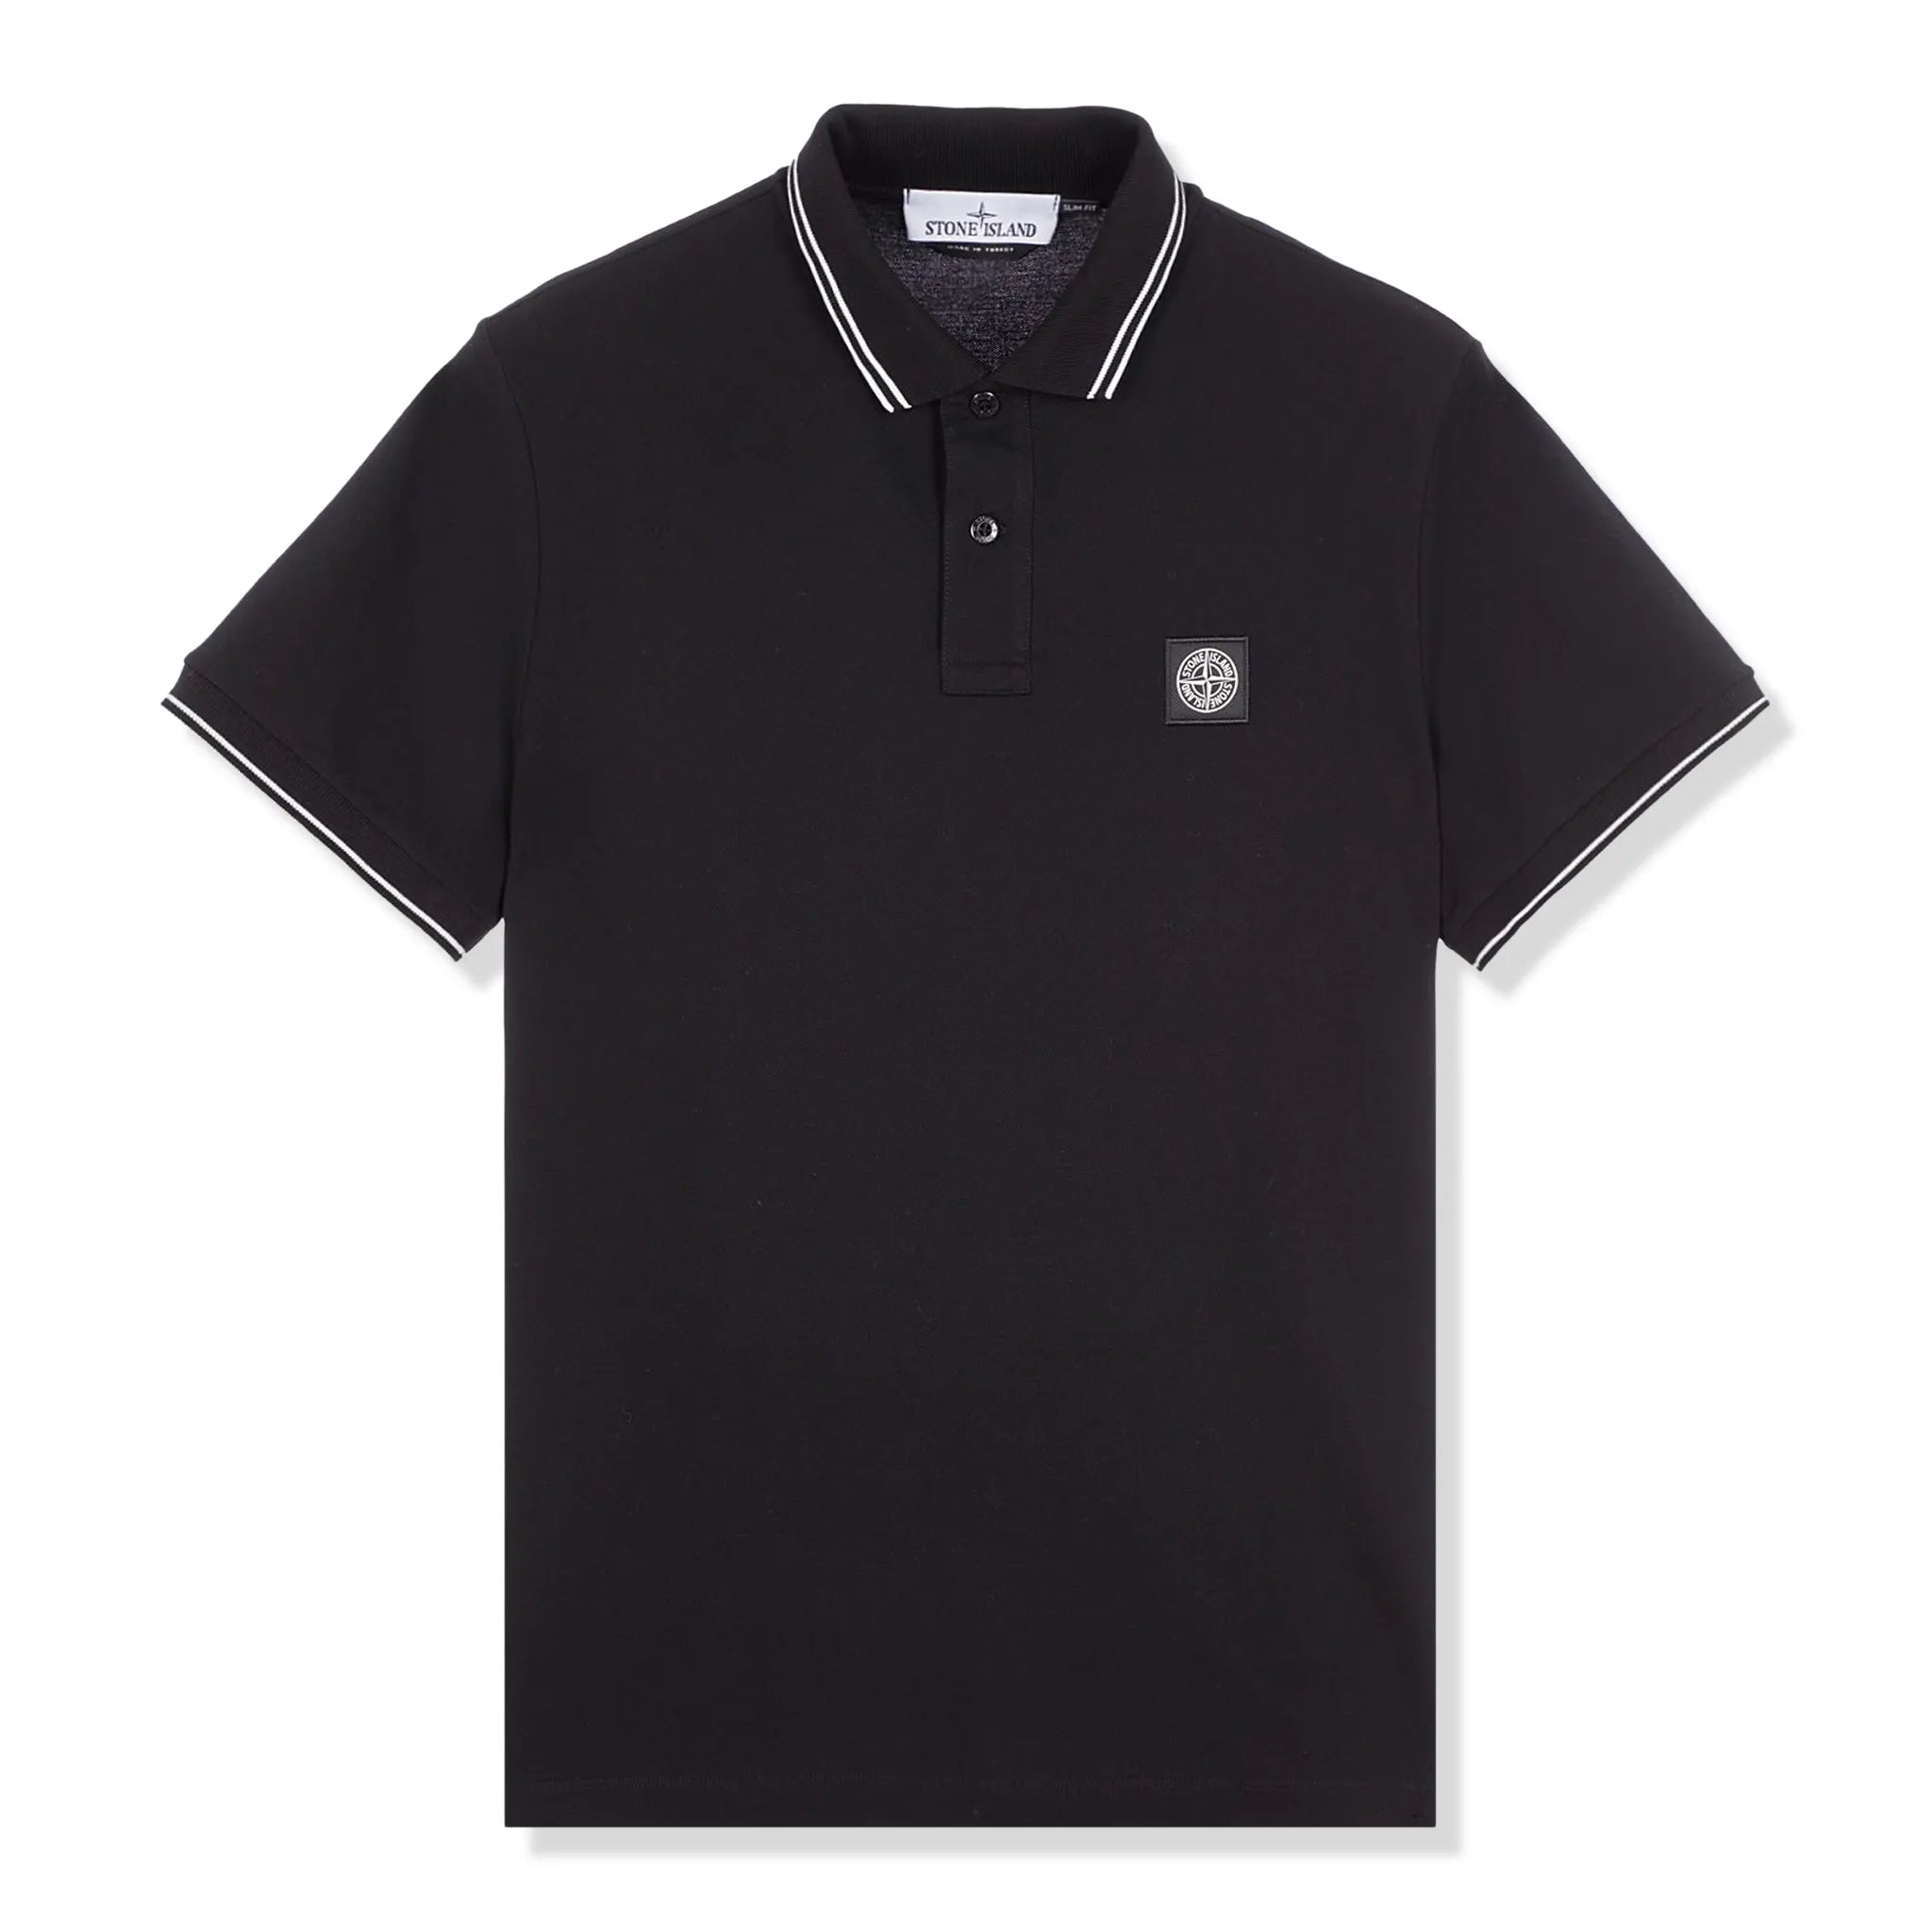 Front view of Stone Island Tipped Badge Logo Black Polo Shirt lange 10152sc18-a0029